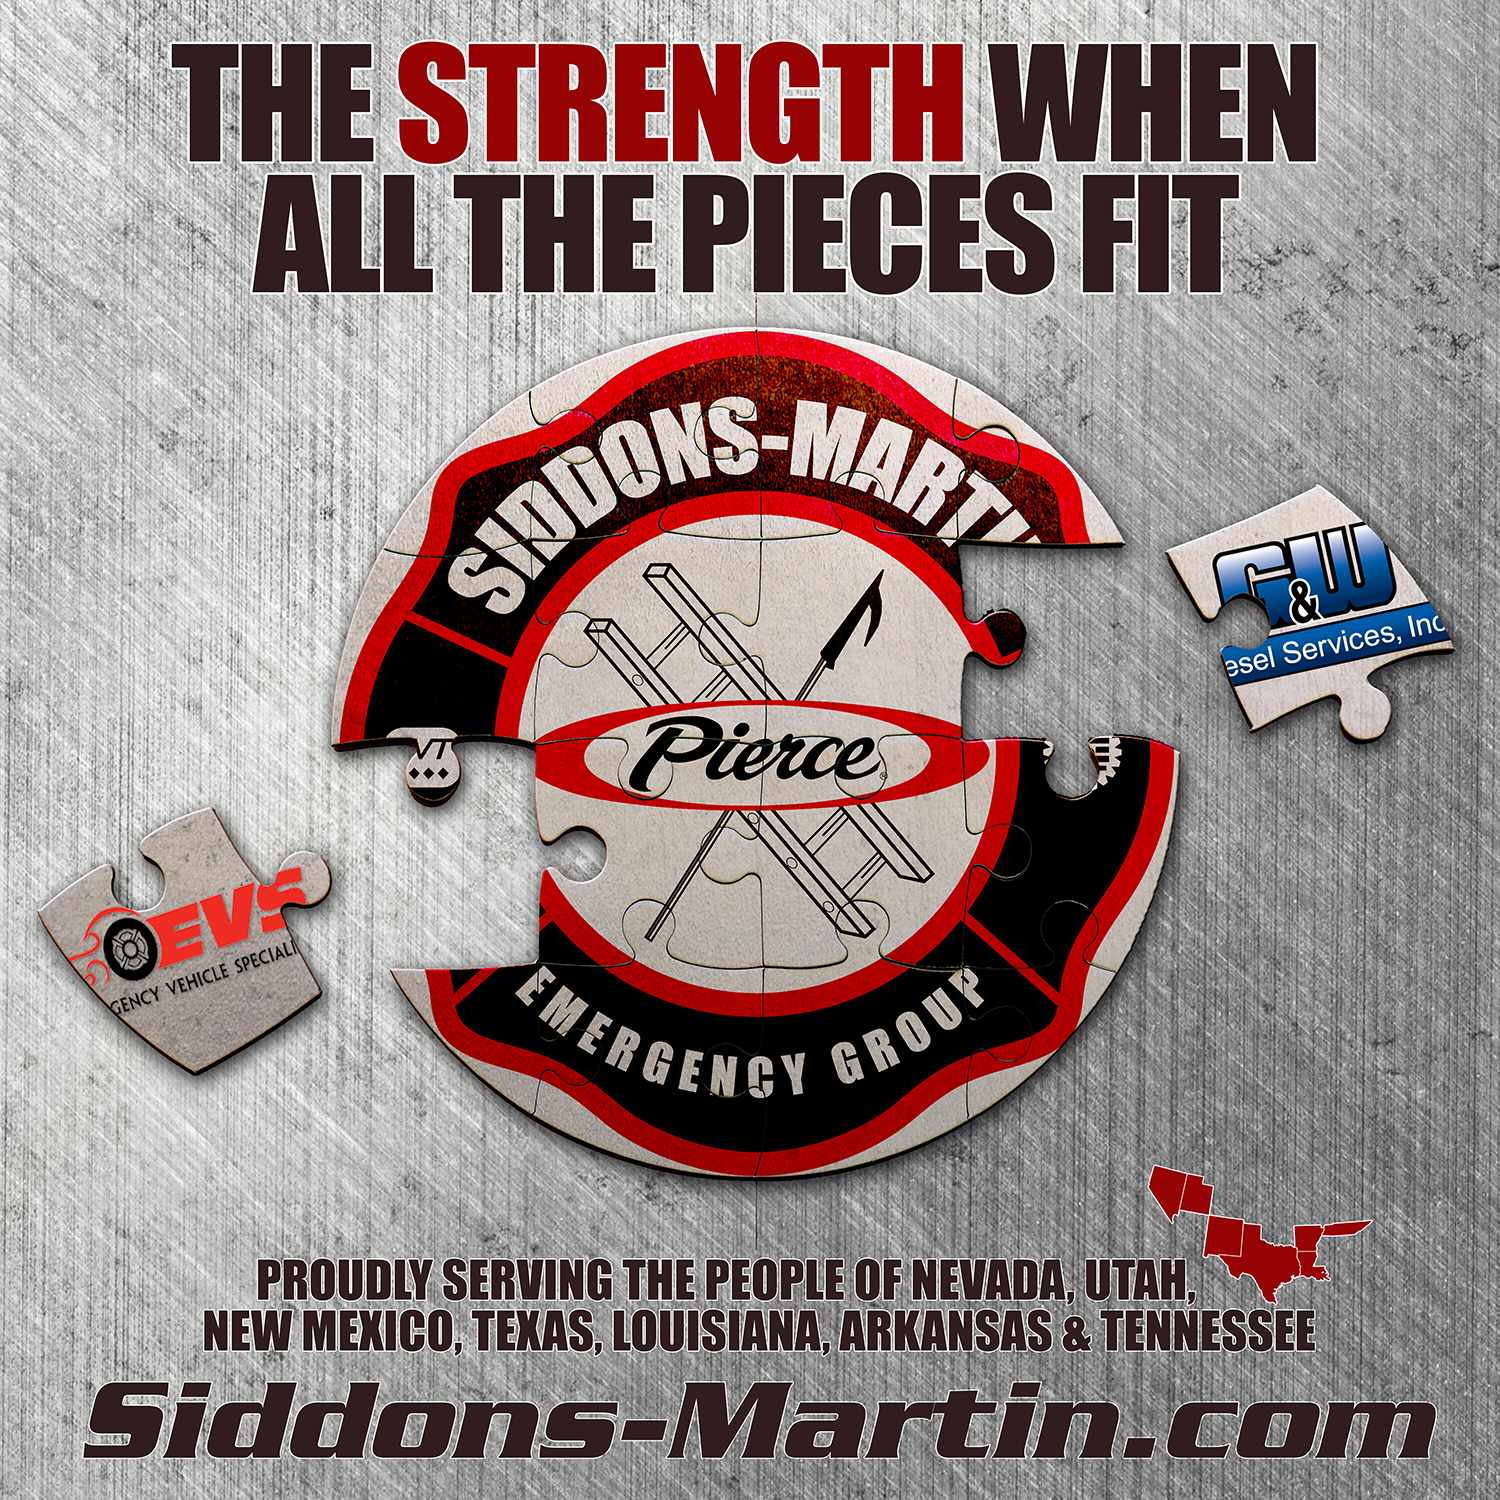 Siddons Martin Emergency Group Joins Together with G&W Diesel Service, Inc.